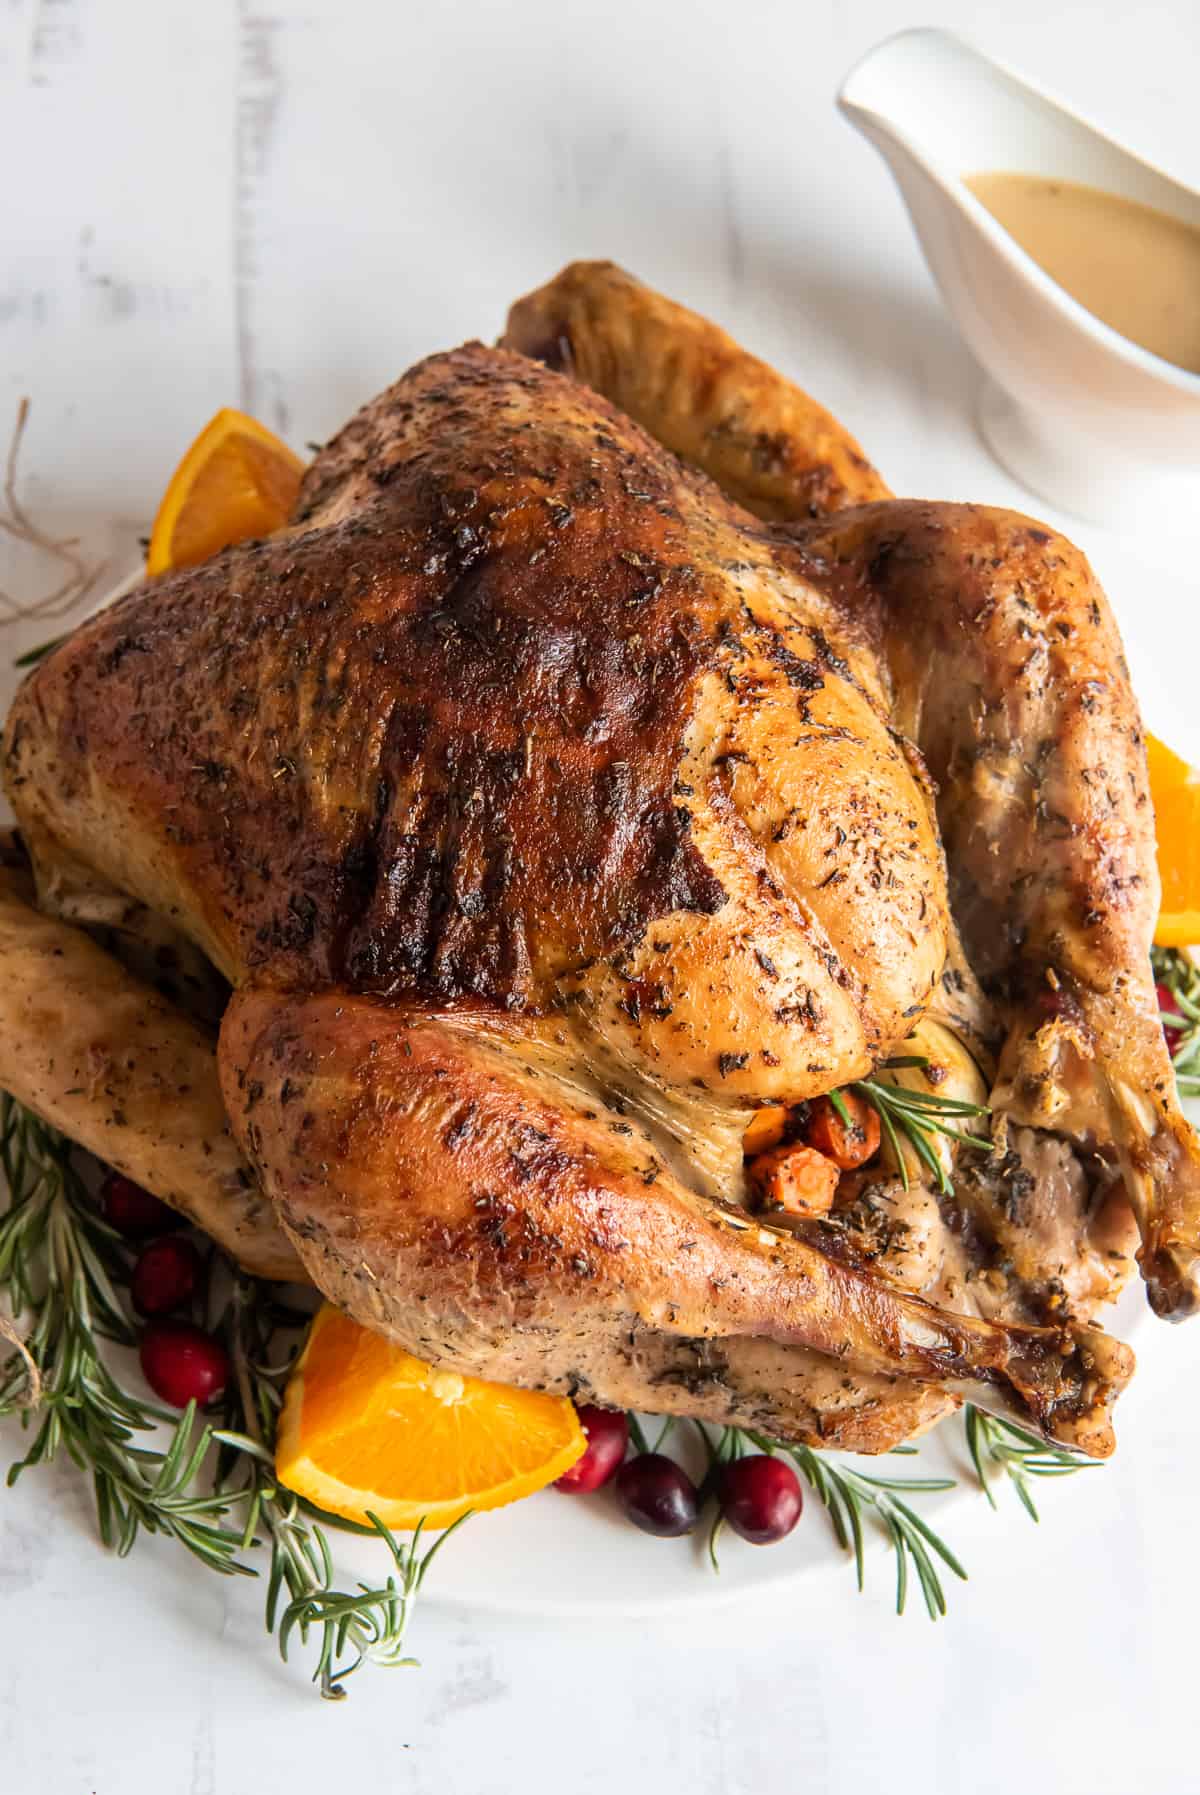 A roasted turkey on a platter with fresh herbs and orange.